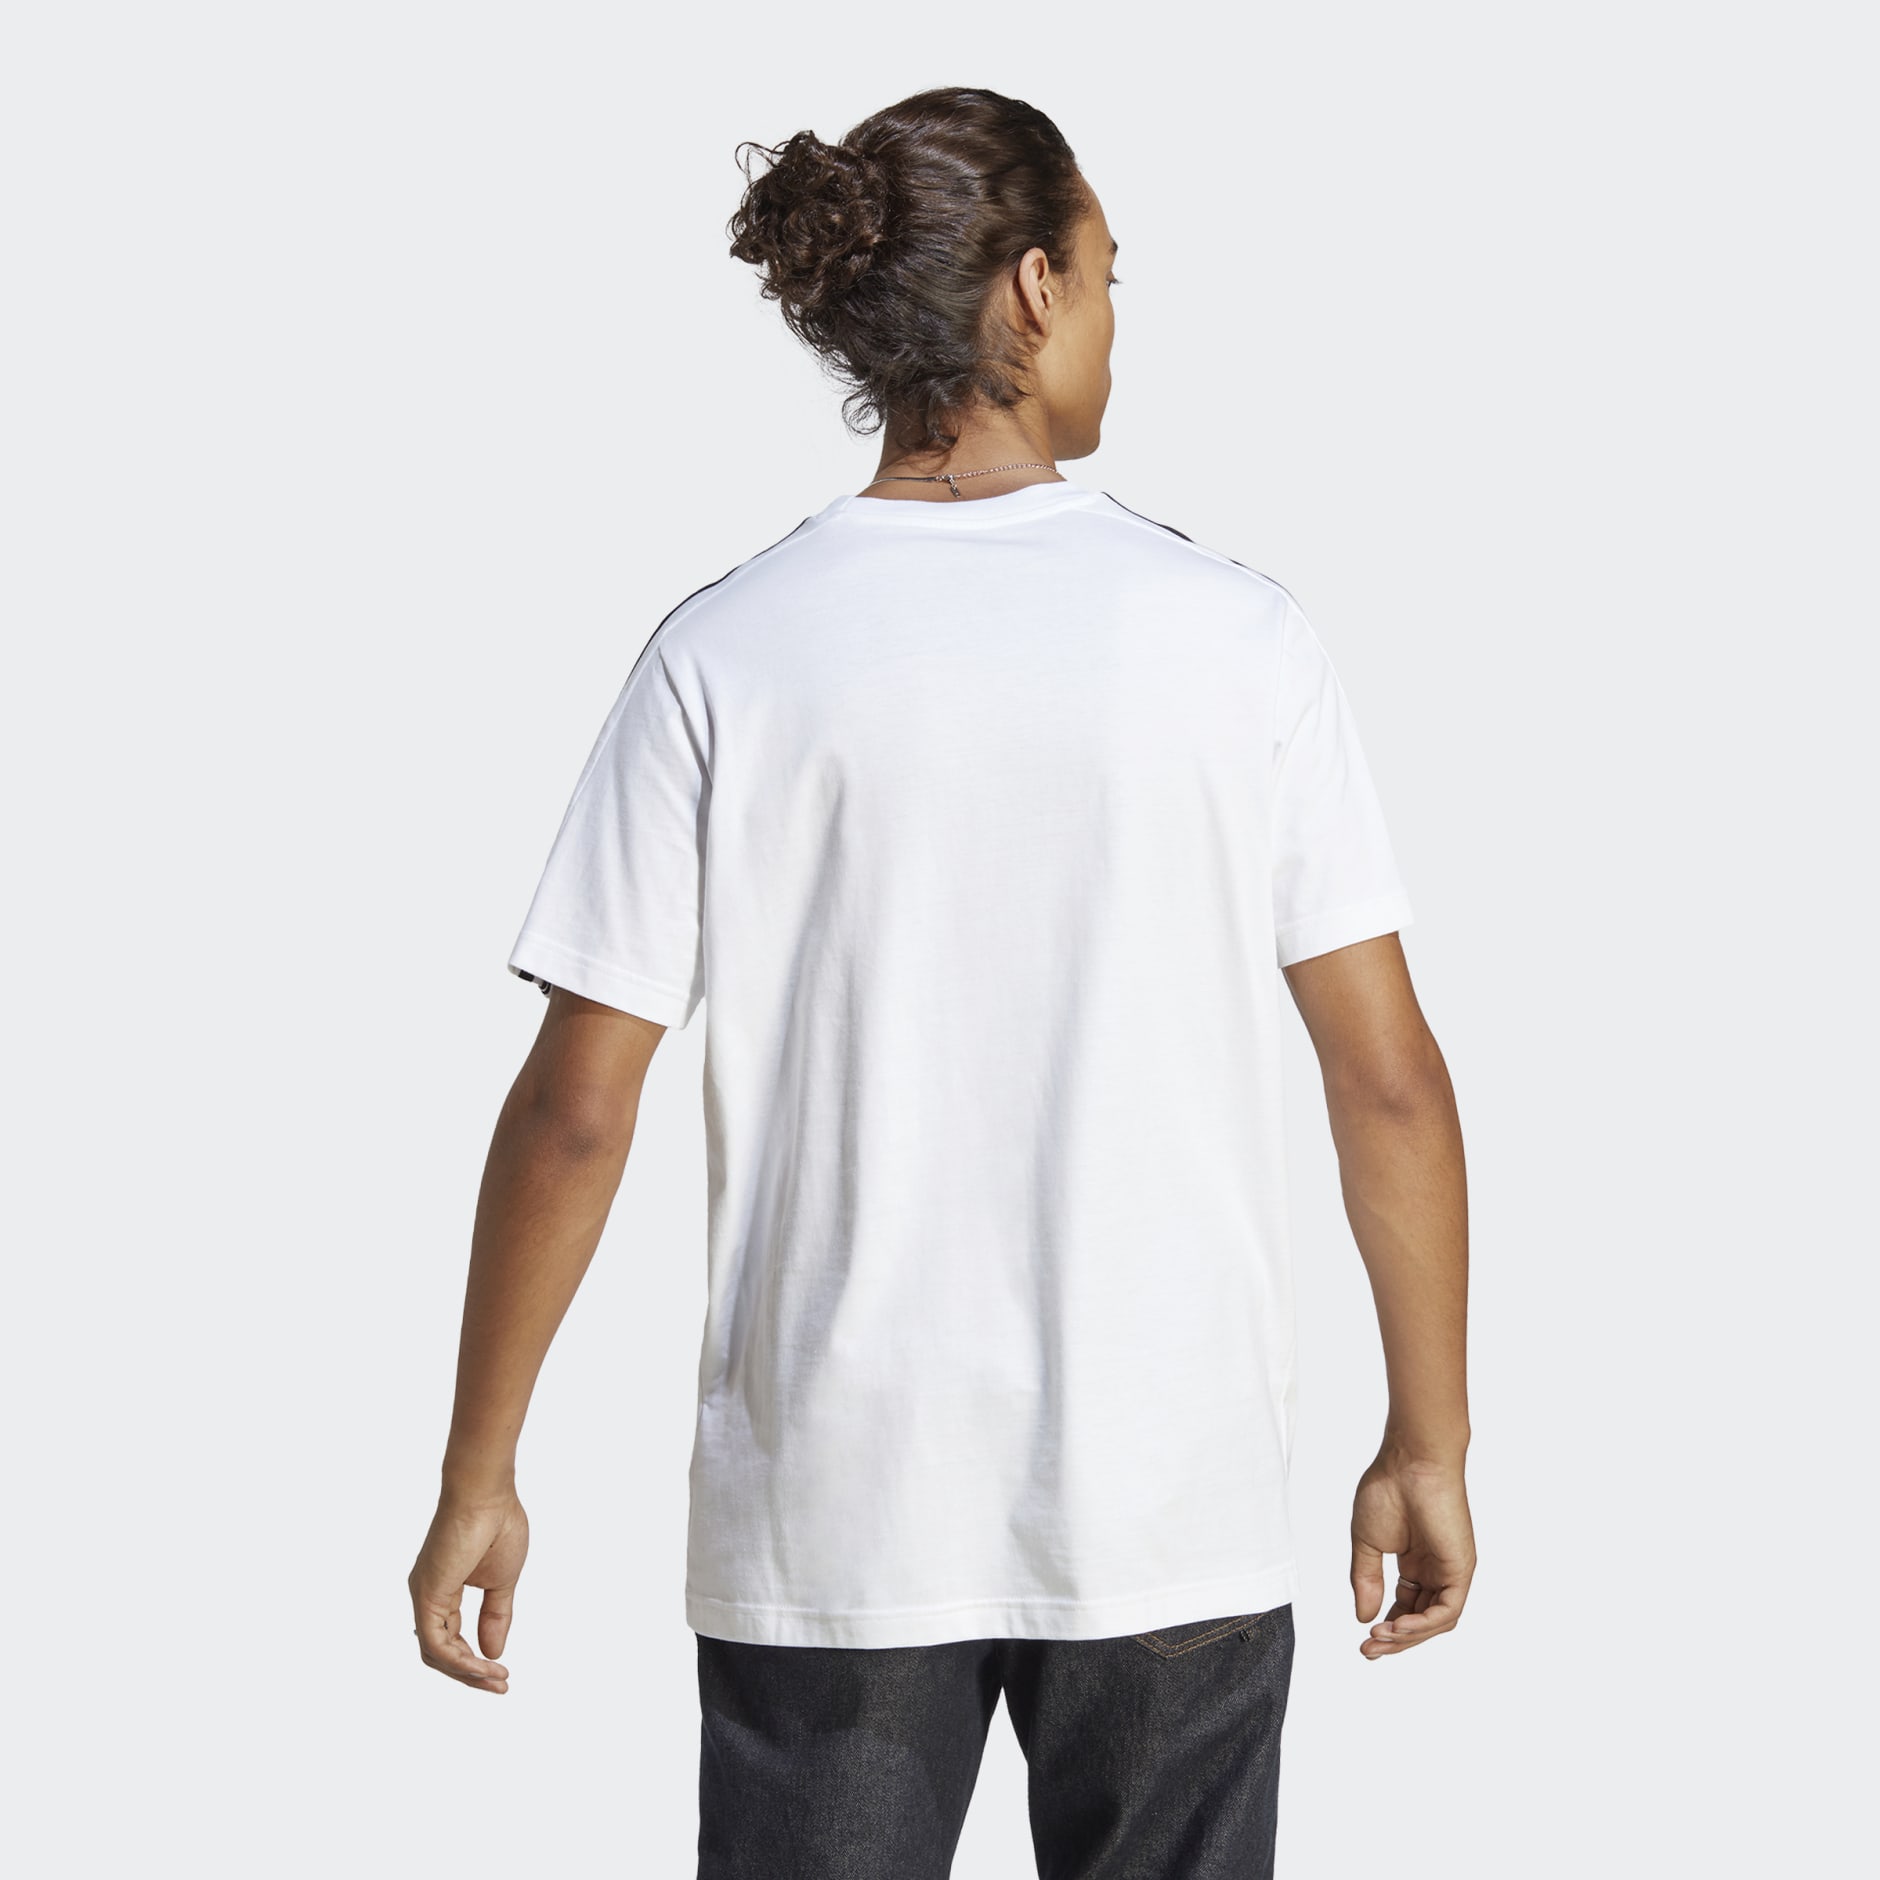 Men's Clothing - Essentials Single Jersey 3-Stripes Tee - White ...